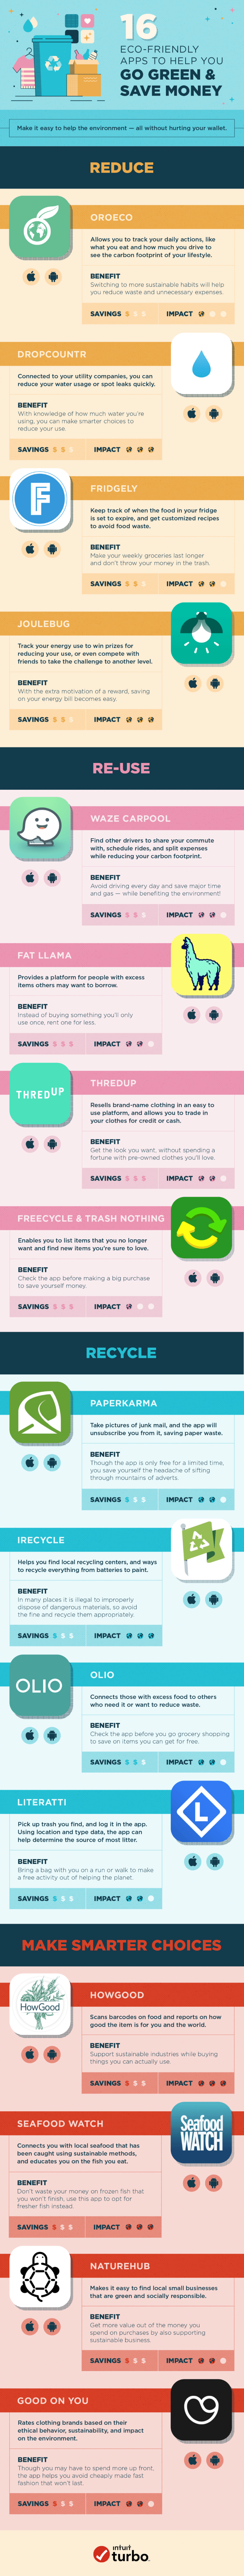 Infographic: Eco-friendly apps